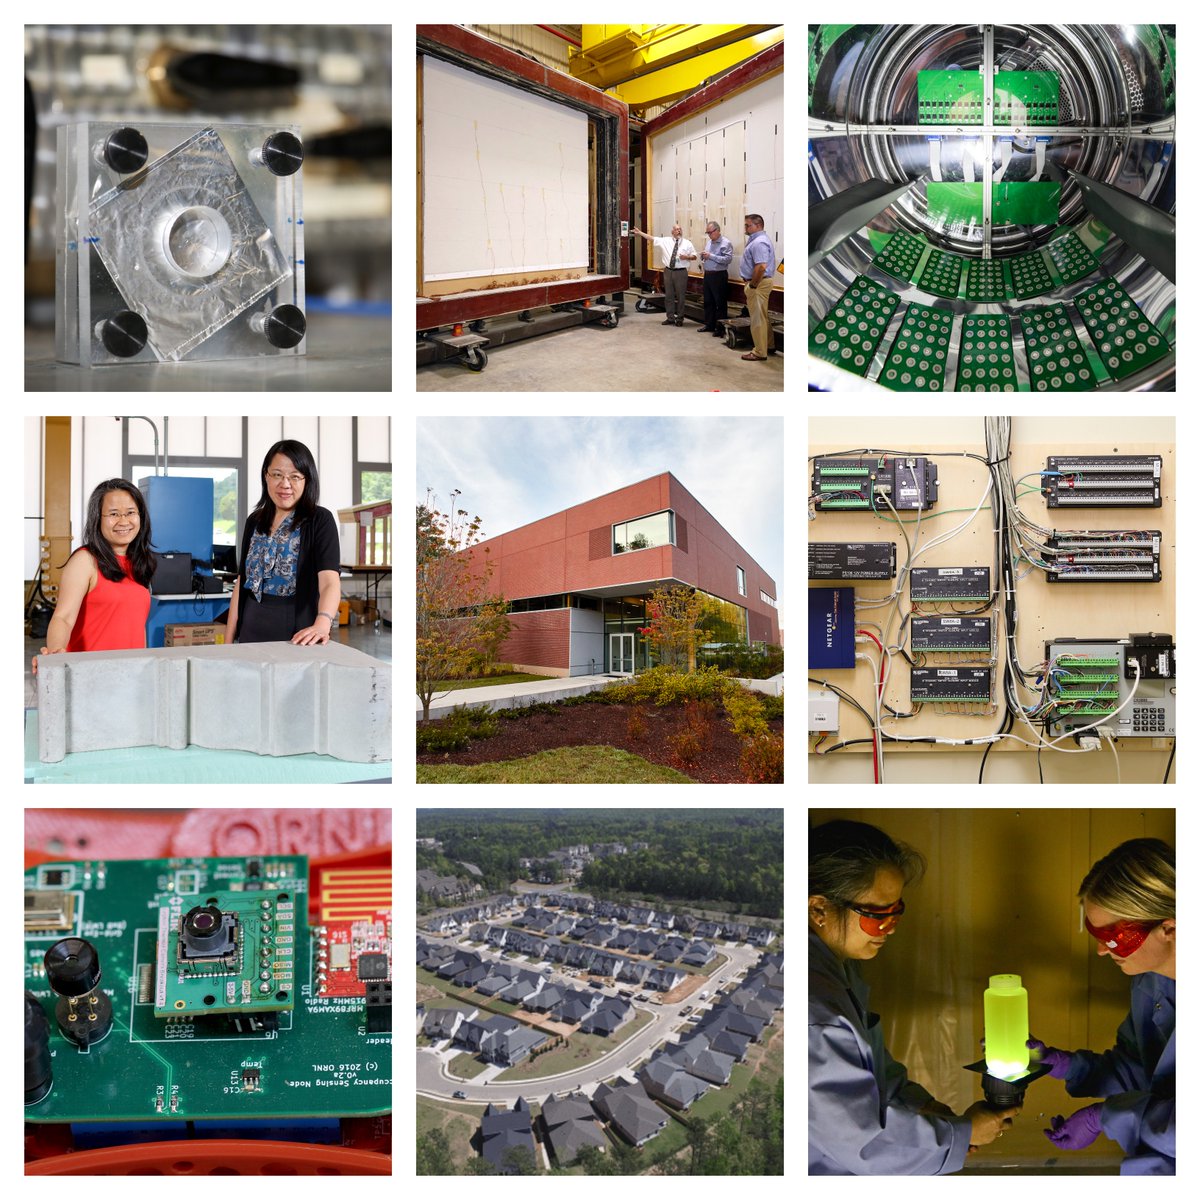 #ORNLBTRIC is bringing the future home with: 

✅ Advanced #Materials
✅ #SmartBuildings
✅ #ConnectedHomes
✅ and #Sensors 

Find out more at ornl.gov/btric